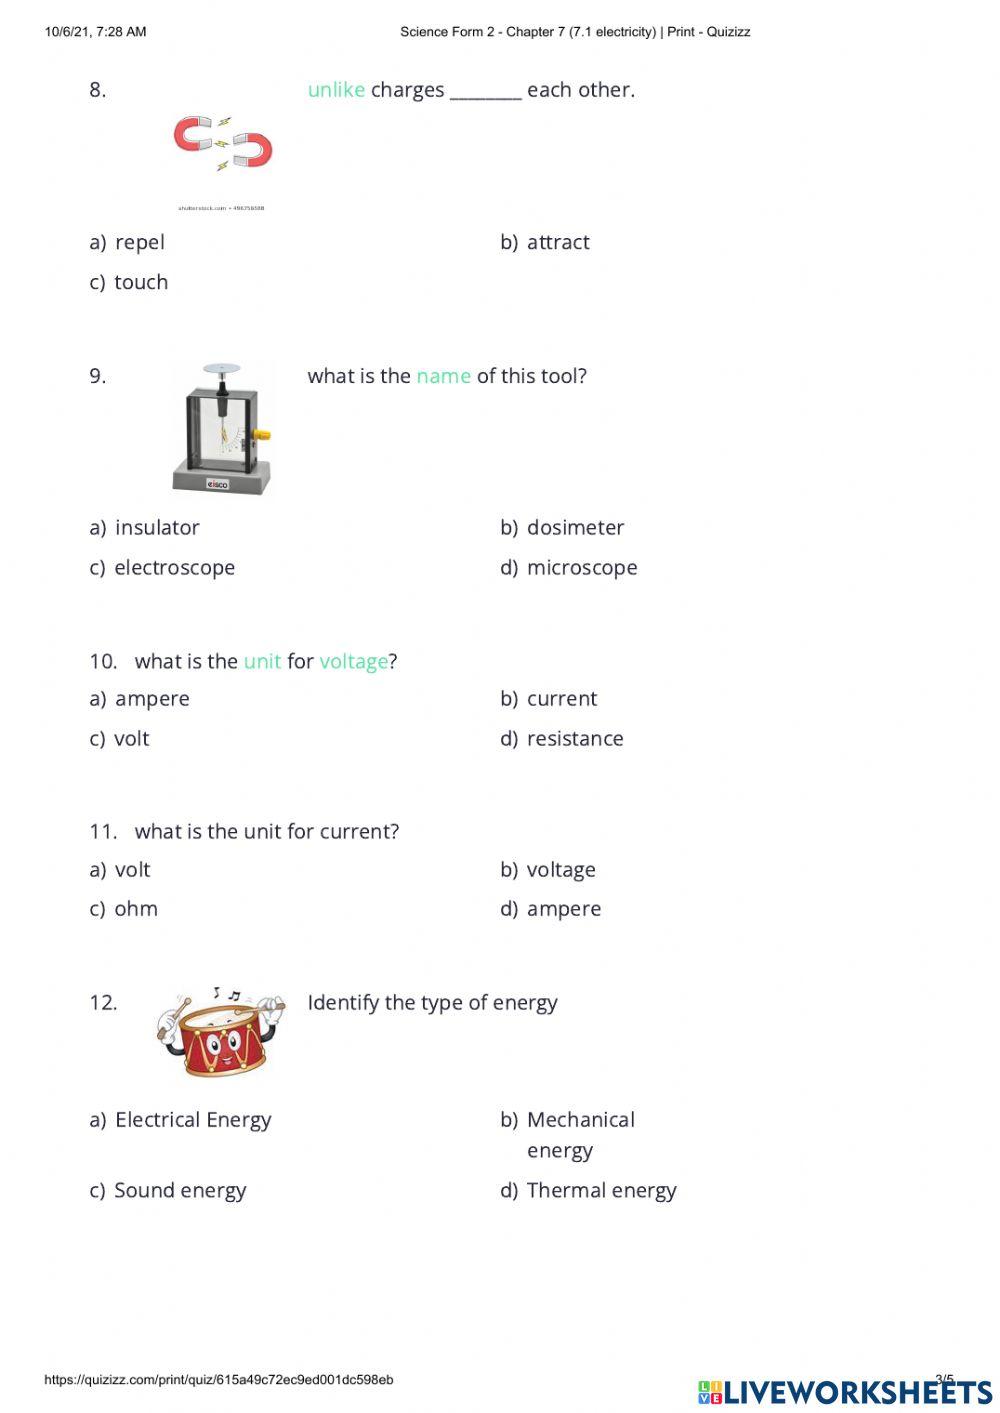 Chapter 7 (science form 2)